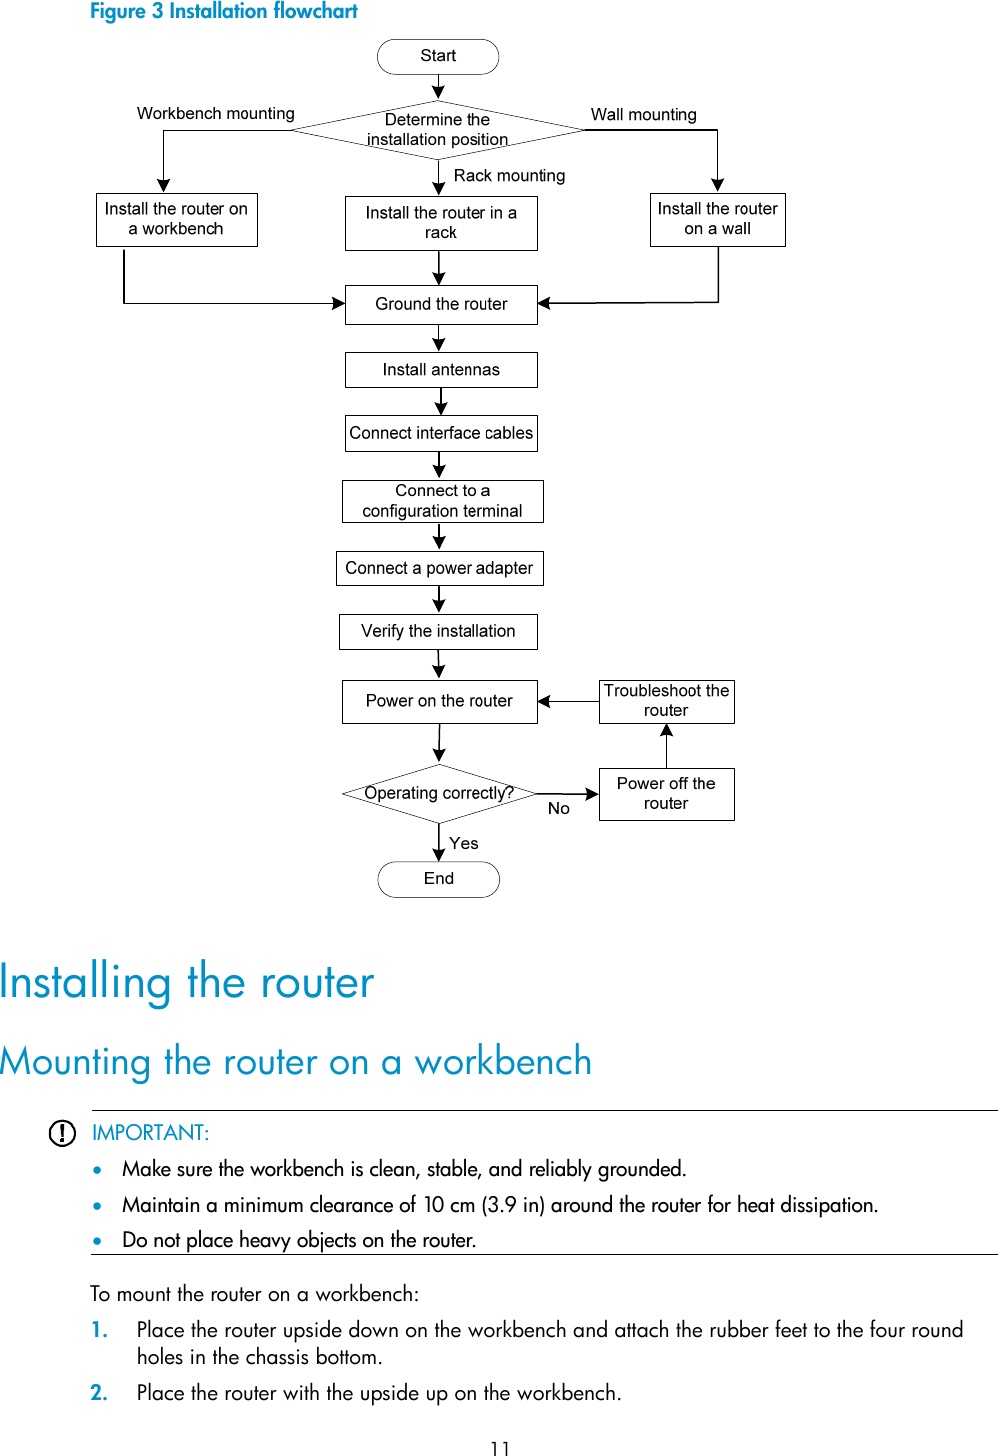  11 Figure 3 Installation flowchart   Installing the router Mounting the router on a workbench  IMPORTANT:  Make sure the workbench is clean, stable, and reliably grounded.  Maintain a minimum clearance of 10 cm (3.9 in) around the router for heat dissipation.  Do not place heavy objects on the router.  To mount the router on a workbench: 1. Place the router upside down on the workbench and attach the rubber feet to the four round holes in the chassis bottom. 2. Place the router with the upside up on the workbench. 